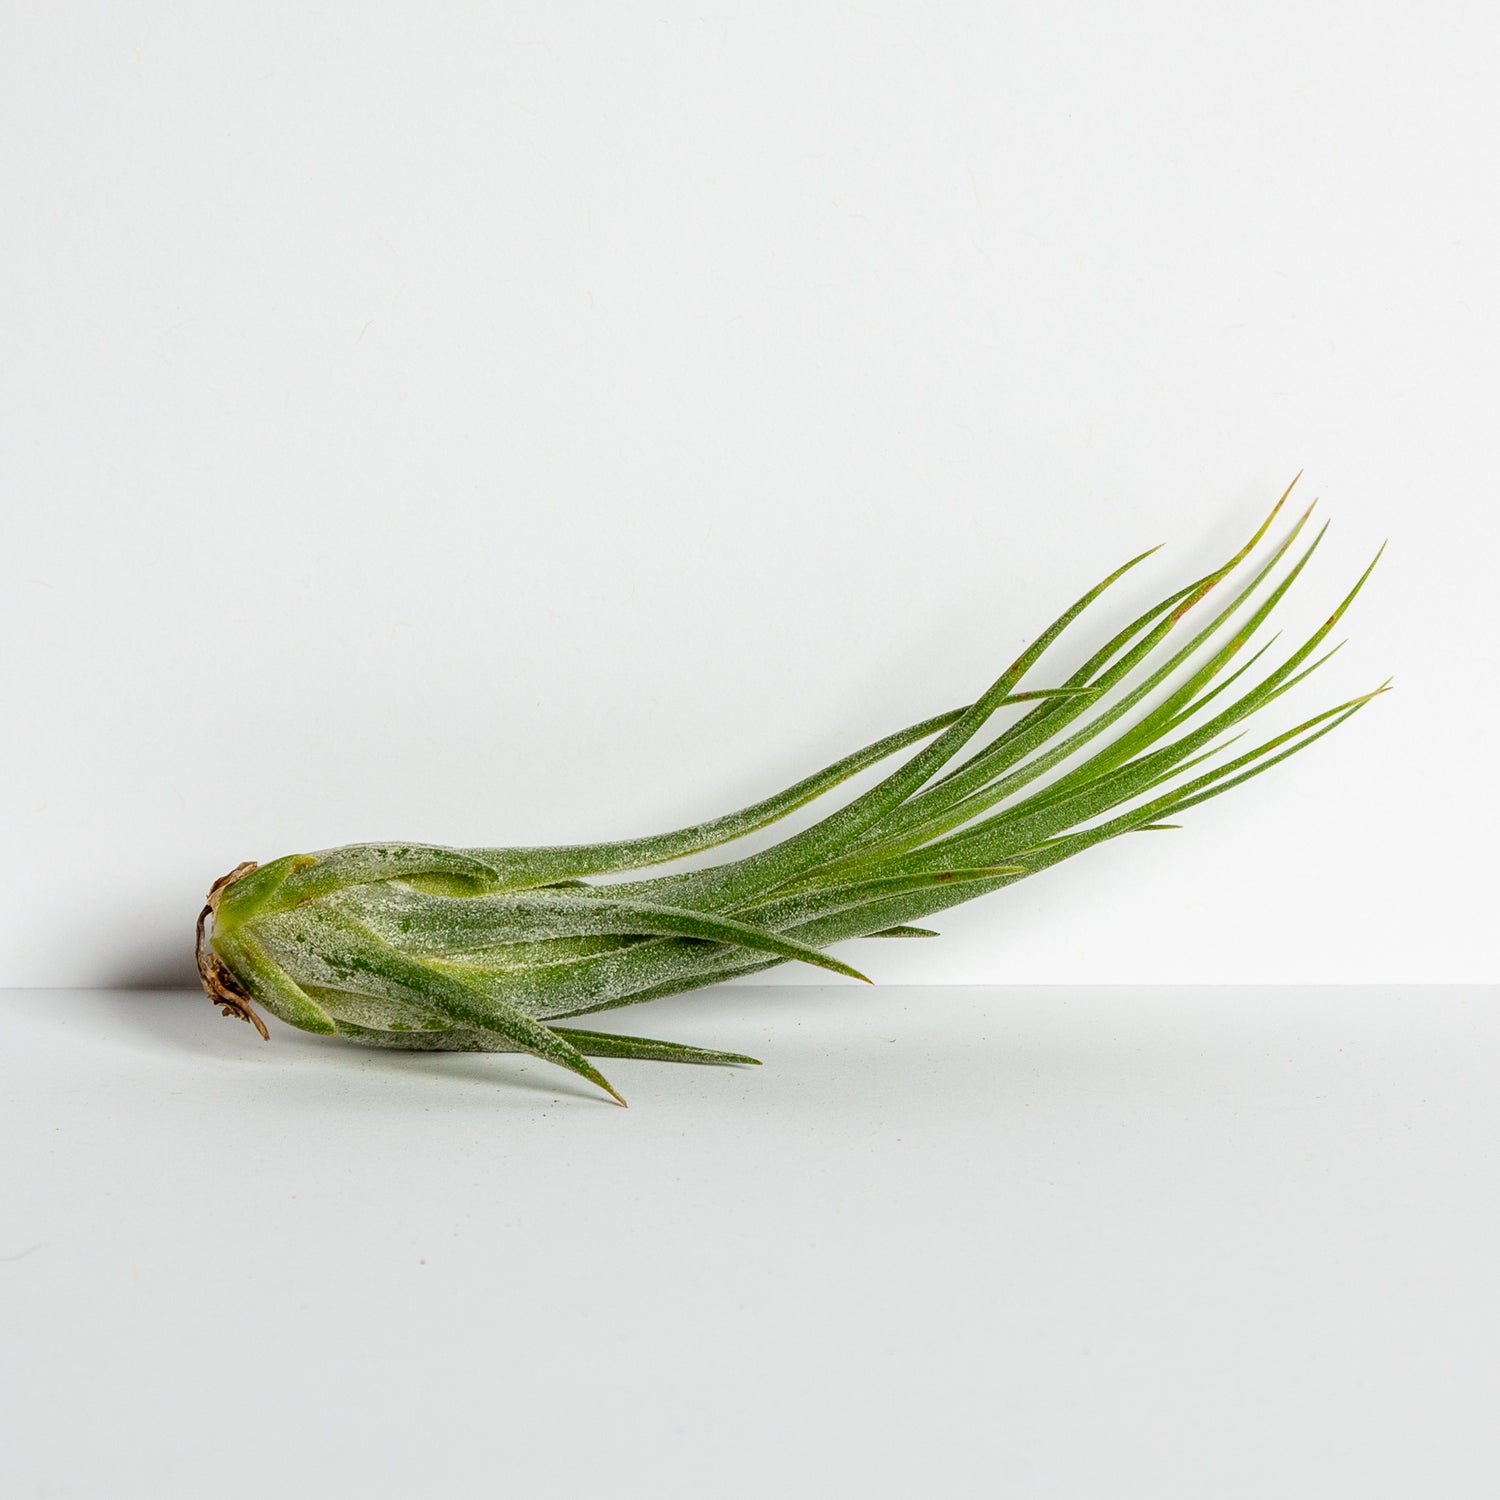 Air Plant 'Ionantha - Scaposa' 4-5" - Urban Sprouts